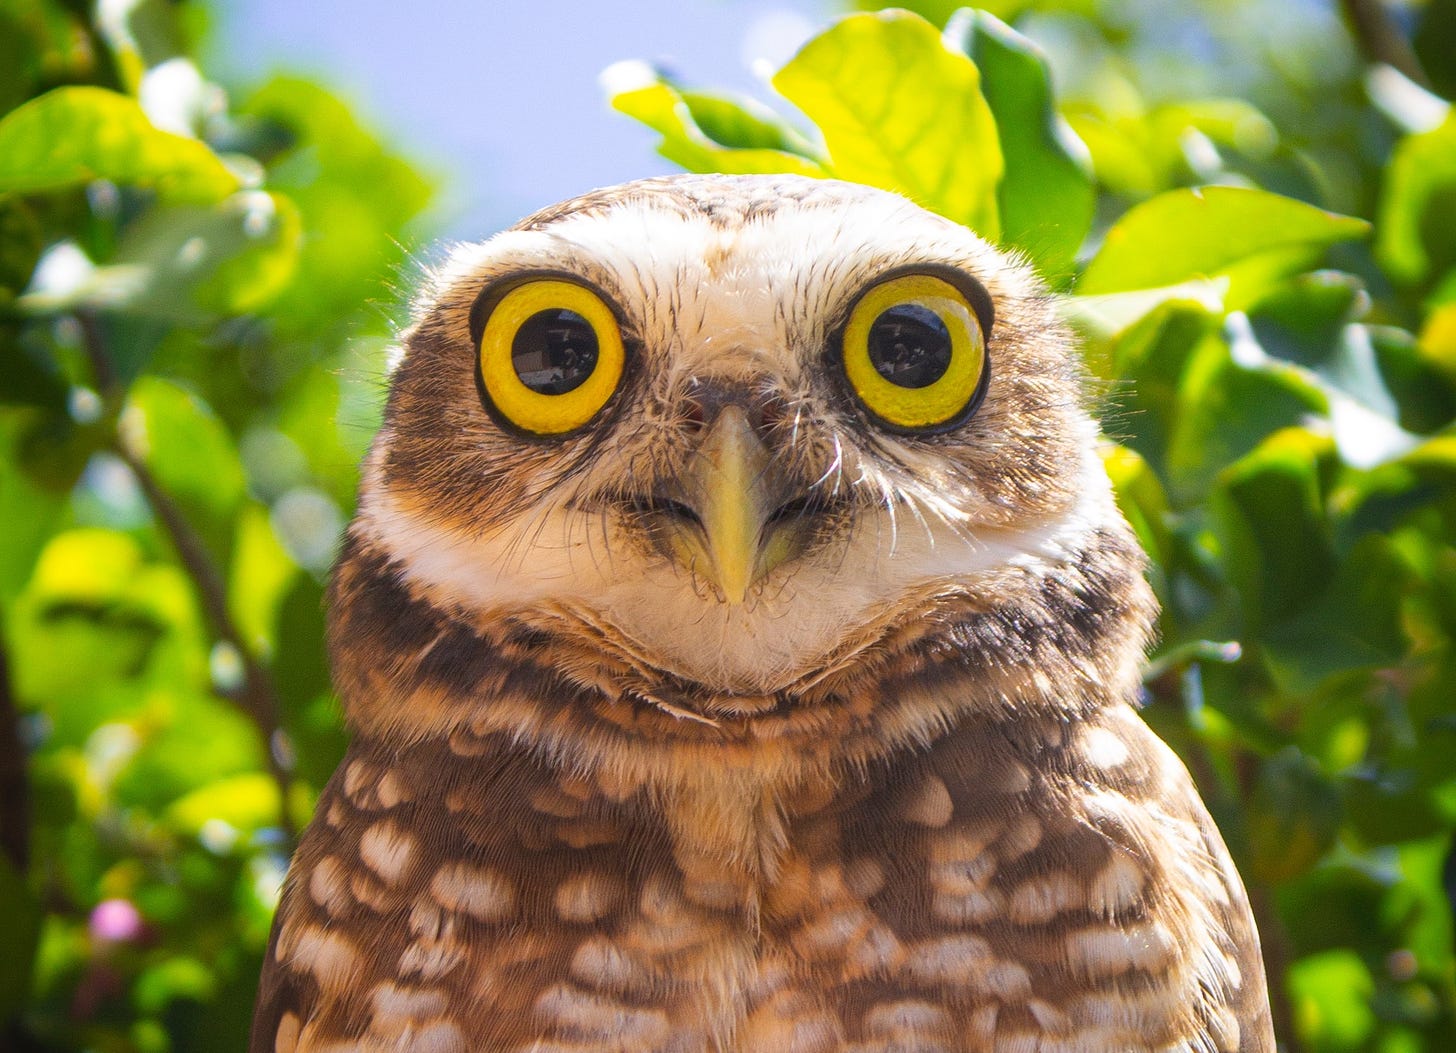 A brown and white speckled owl with comically large yellow eyes staring directly at the viewer